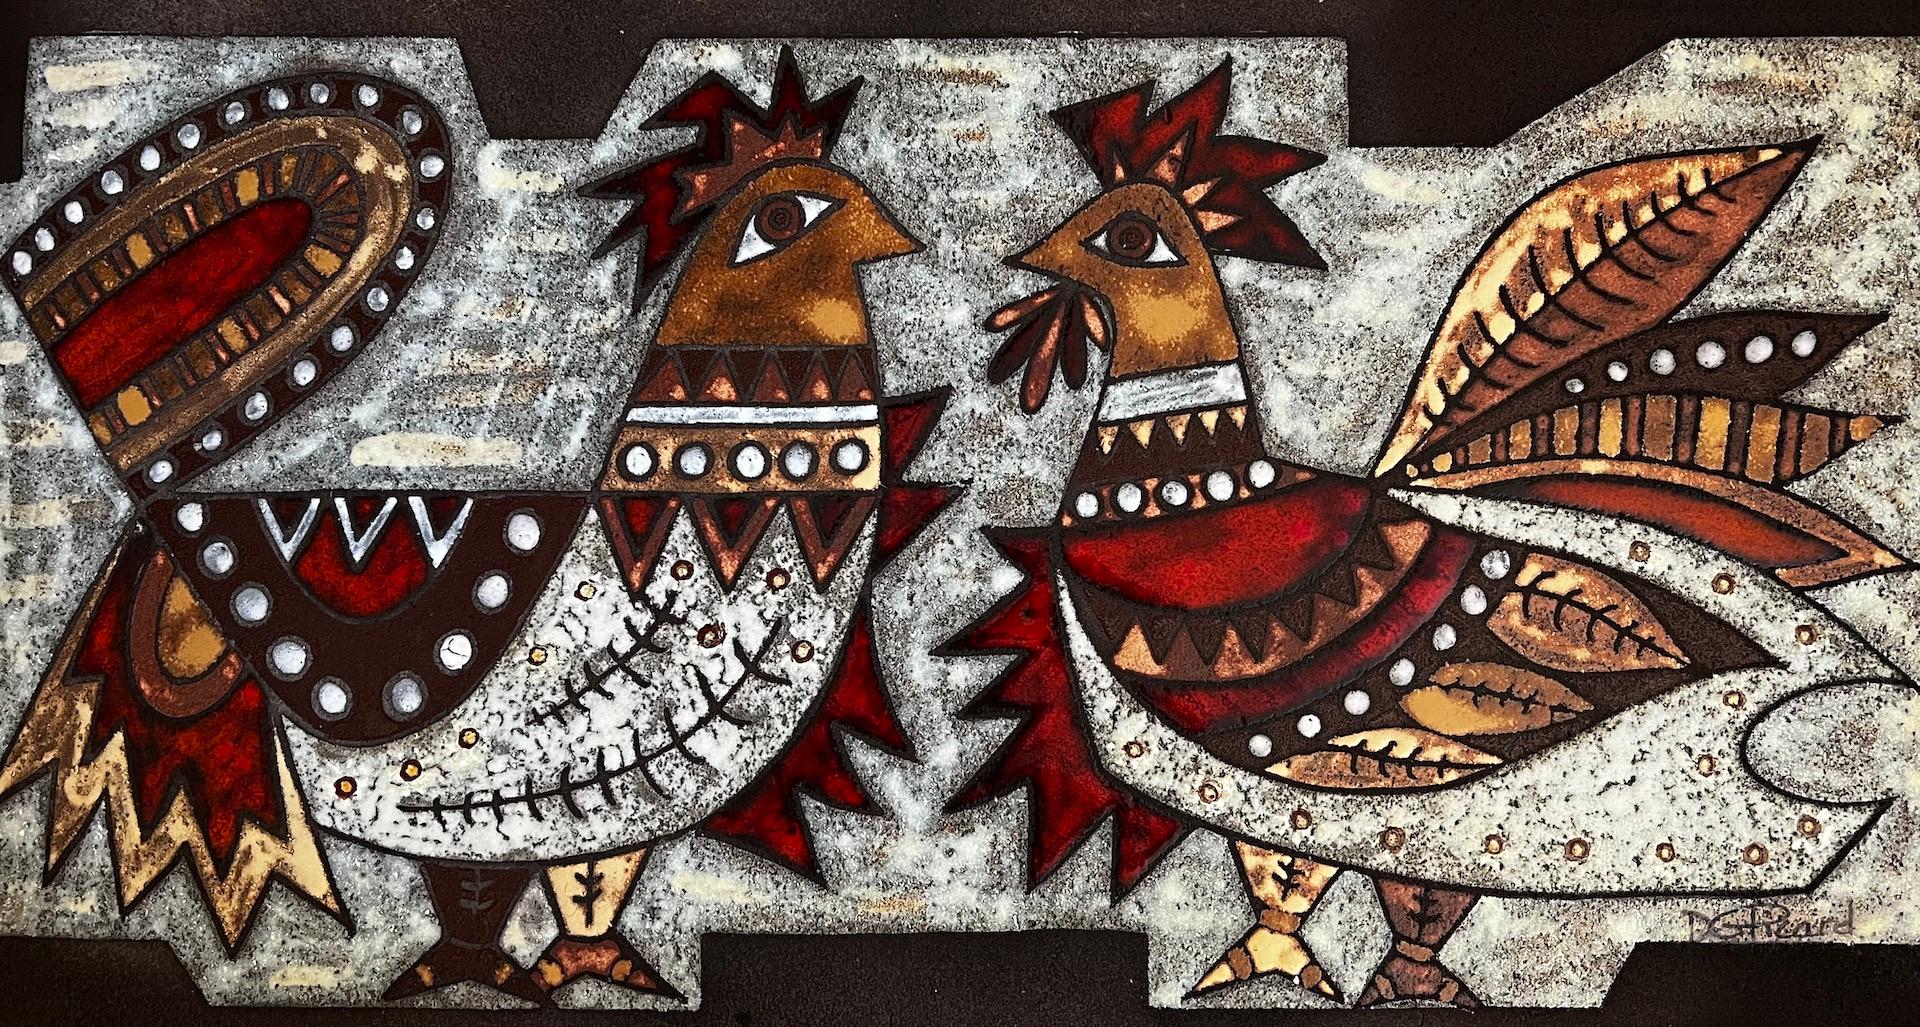 Decorative plaque by Max and Dominique PICARD, VALLAURIS - 1960s
 (signed lower right). Enamelled lava with rooster motifs: beautiful deep colors of red. Large format, wall hanging on the back.
In perfect condition: no chips.
Rare piece for sale.